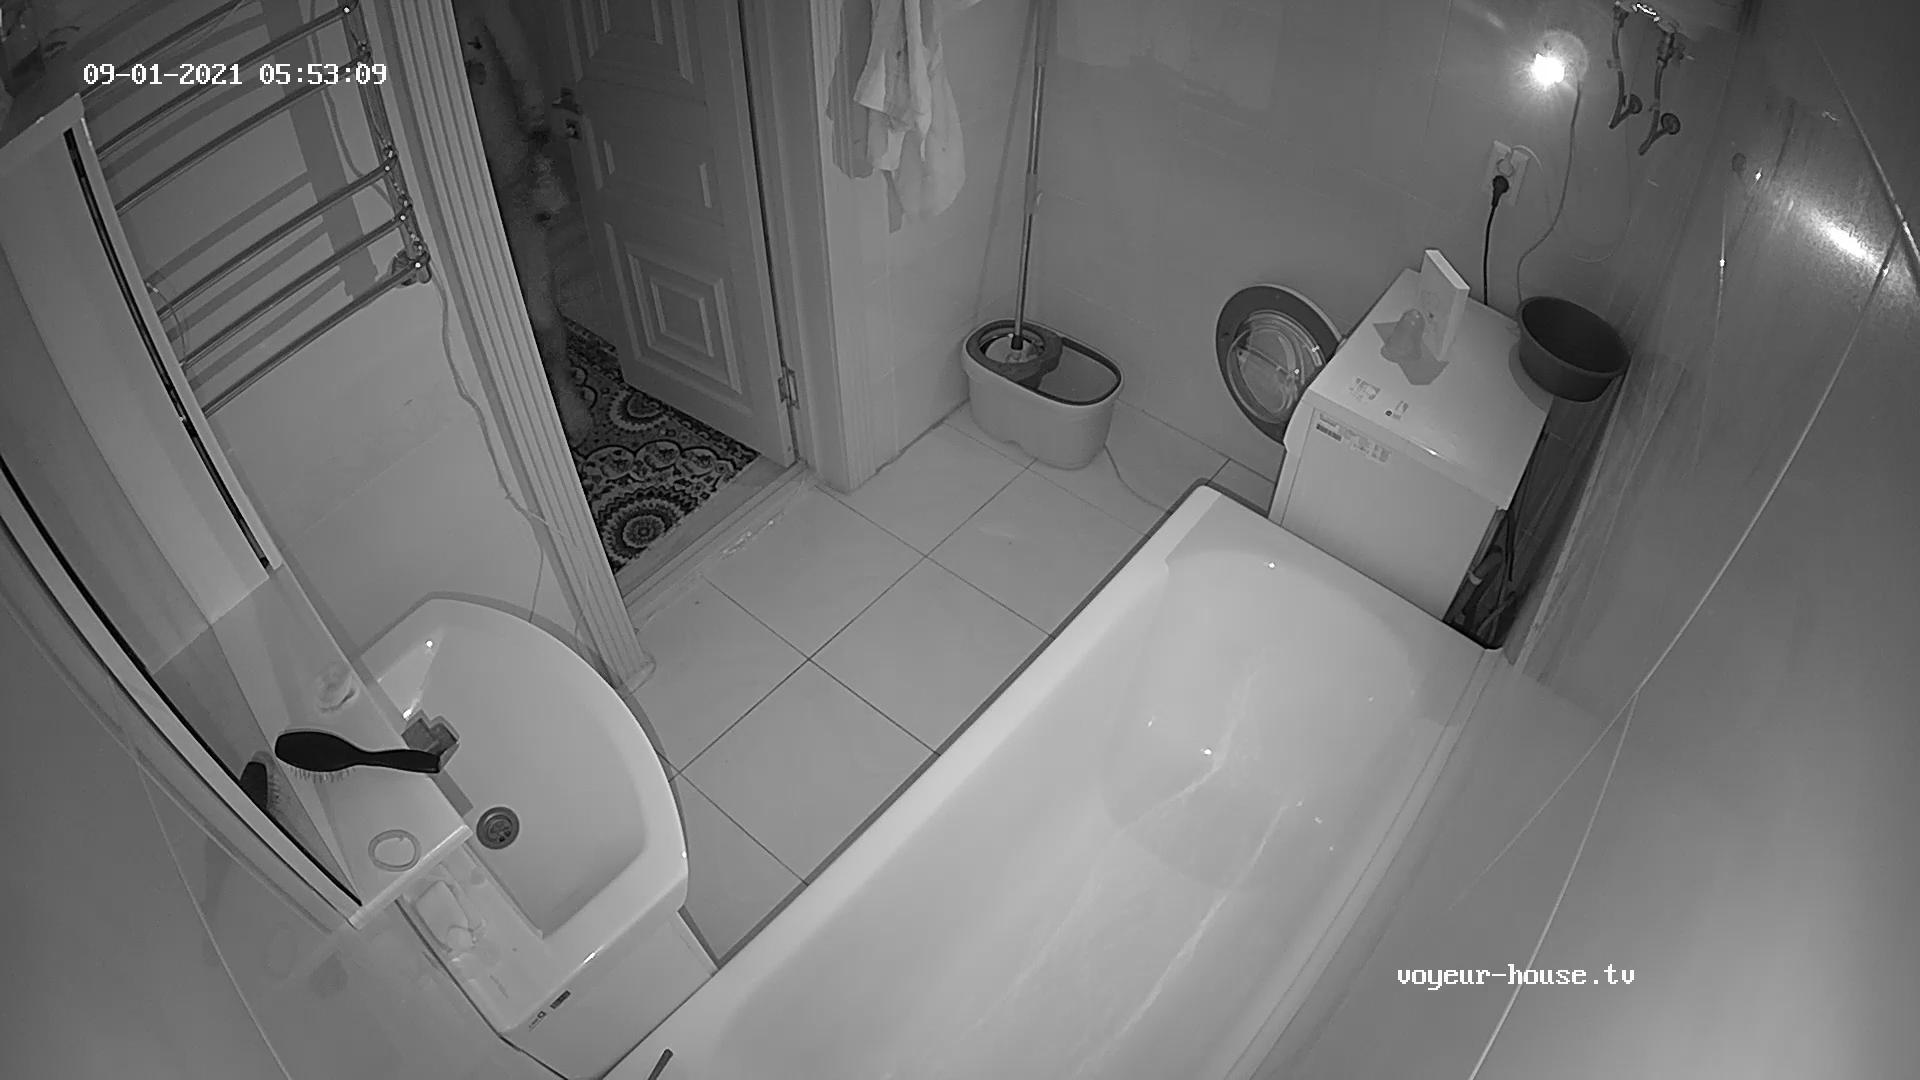 Artem washing his cock in the sink 1 Sep 2021